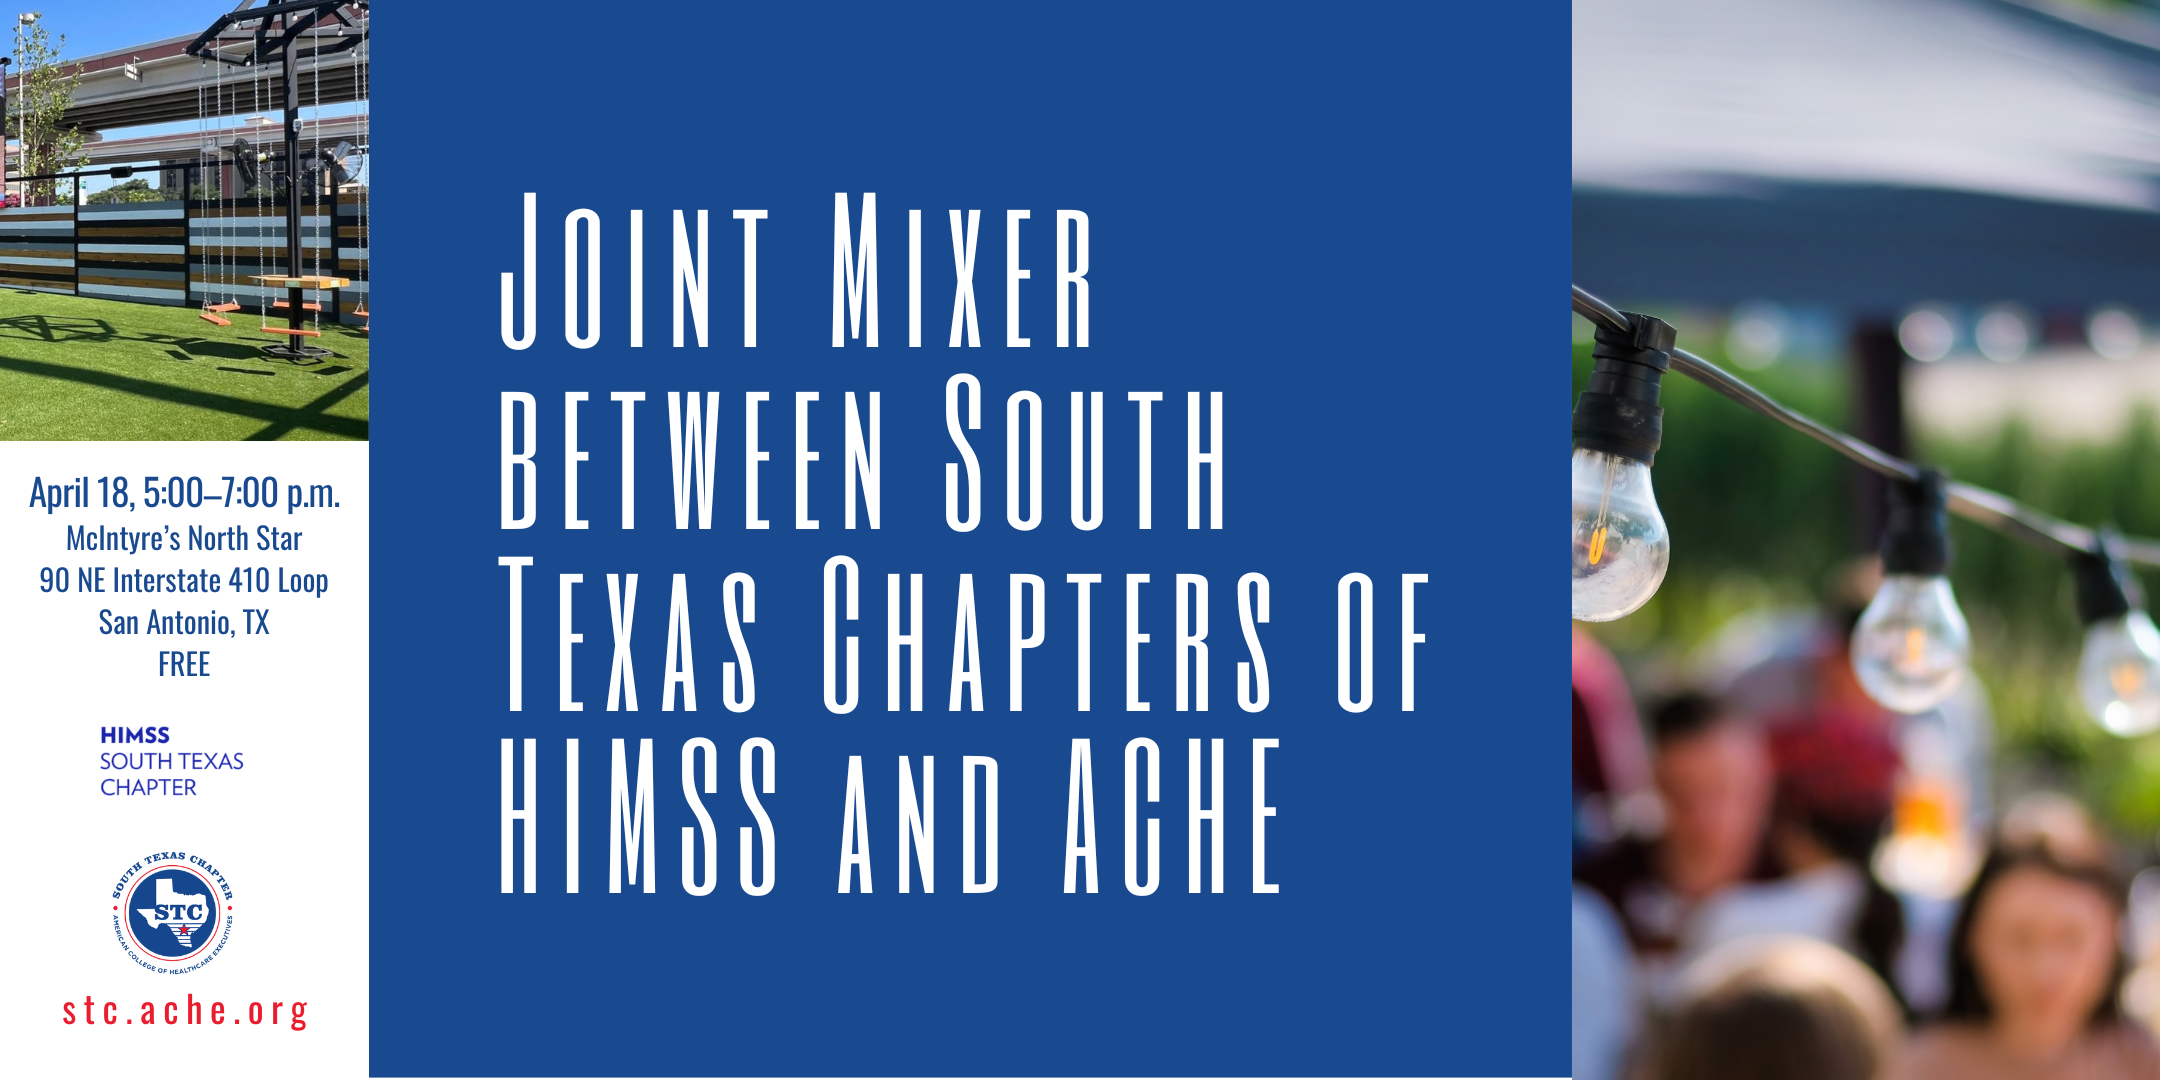 Joint Mixer between South Texas Chapters of HIMSS and ACHE